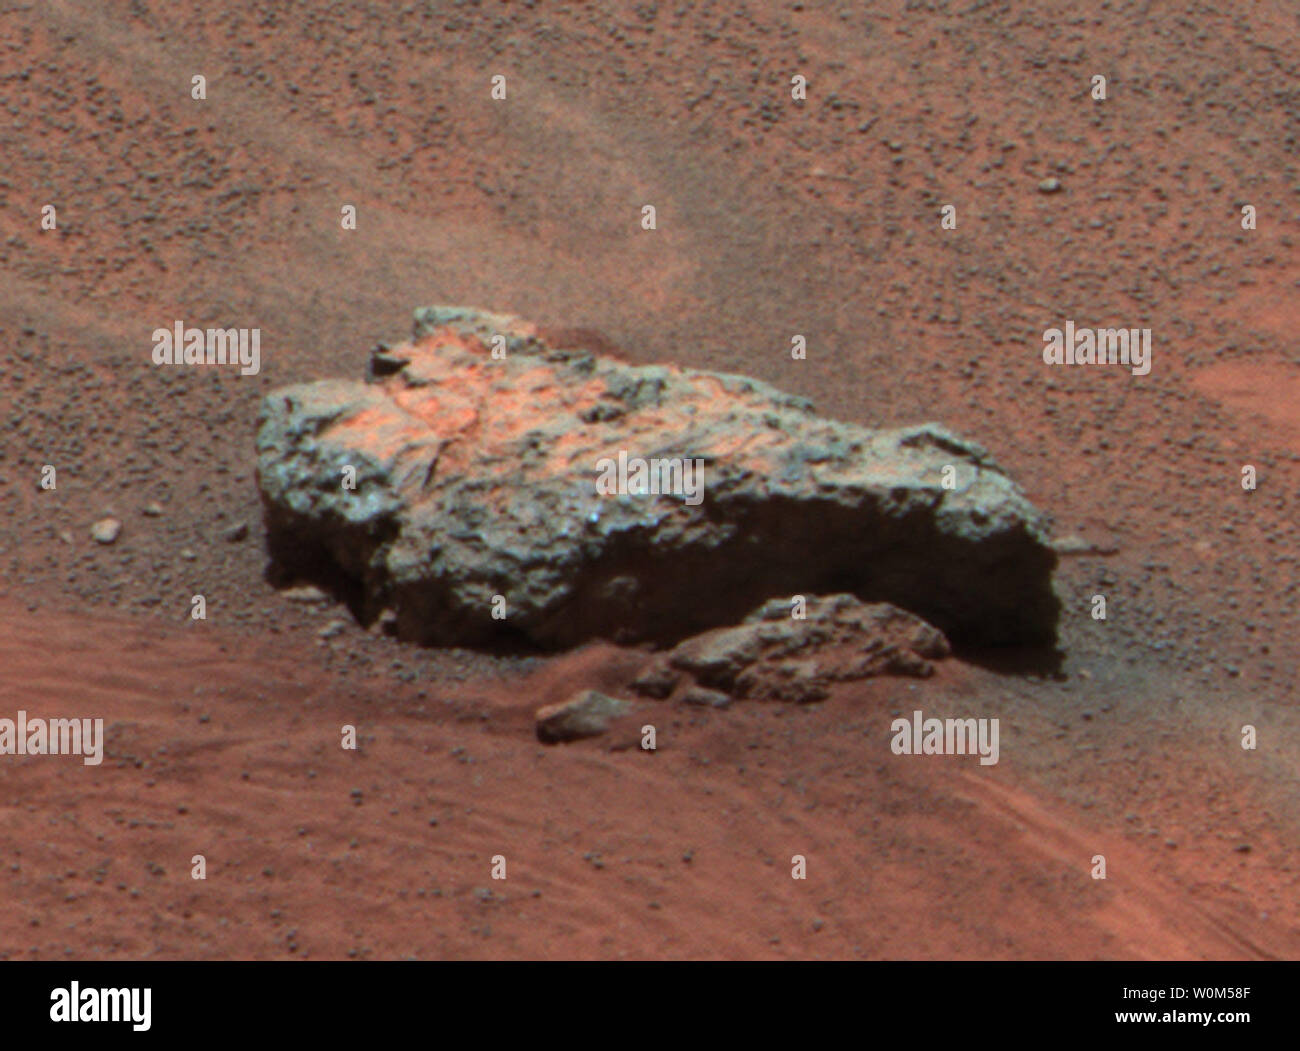 This Mars Exploration Rover Opportunity panoramic camera image shows 'Bounce Rock,' a rock the airbag-packaged rover struck while rolling to a stop on January 24, 2004. This is the largest rock for as far as the eye can see, approximately 35 centimeters (14 inches) long and 10 centimeters (4 inches) high. There appears to be a dusty coating on the top of parts of the rock, which may have been broken when it was struck by the airbags. The rock was about 5 meters (16 feet) from the rover when this image was obtained. This is an enhanced color composite image from sol 36 of the rover's journey, g Stock Photo